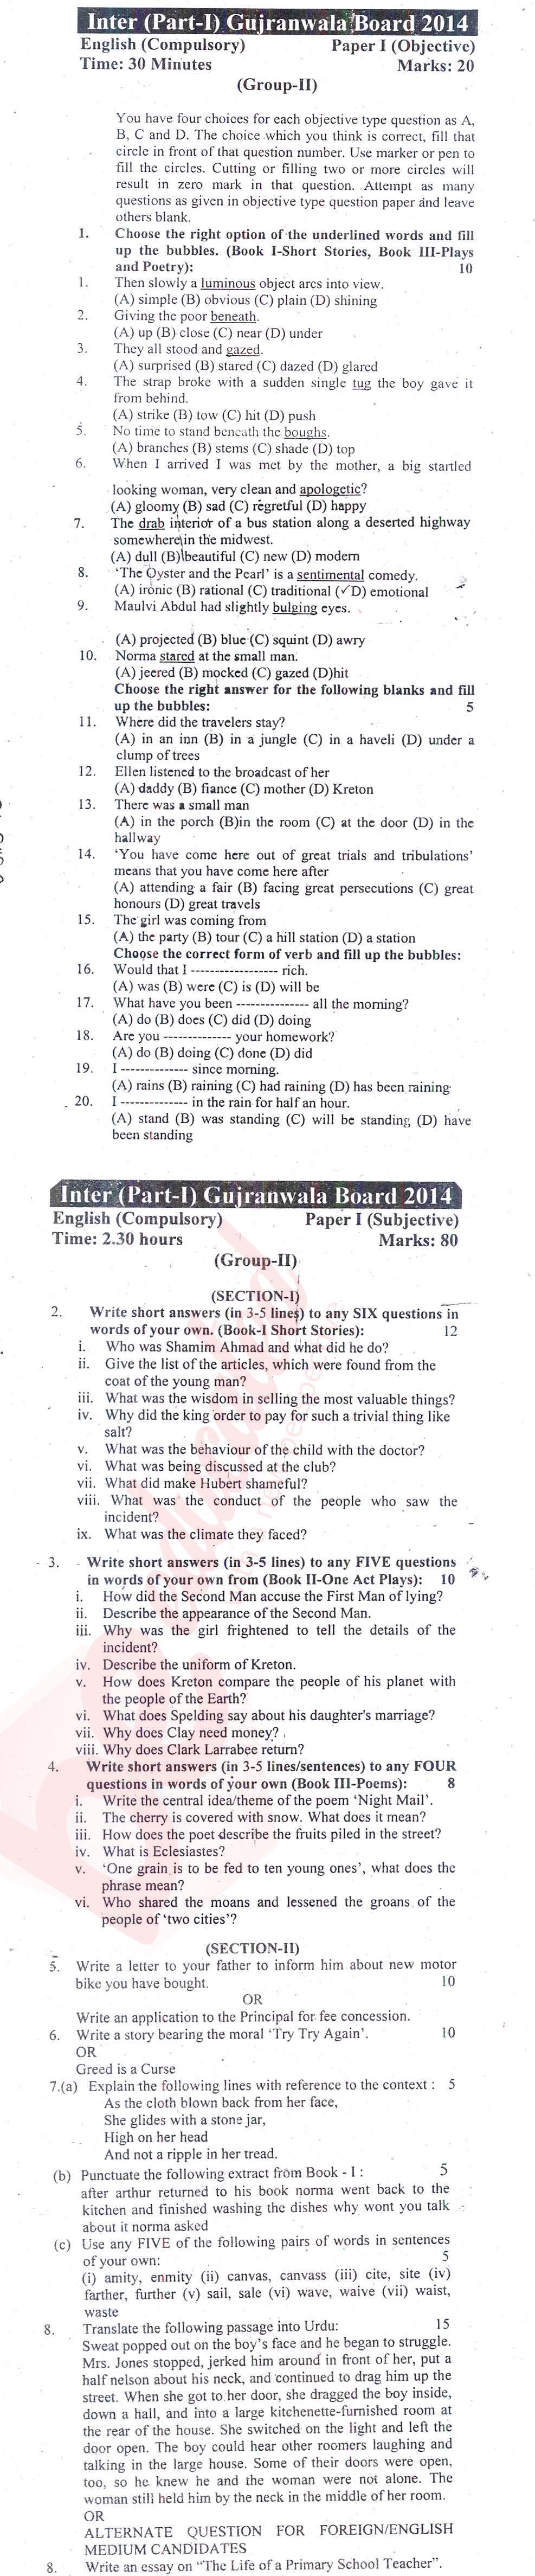 English 11th class Past Paper Group 2 BISE Gujranwala 2014